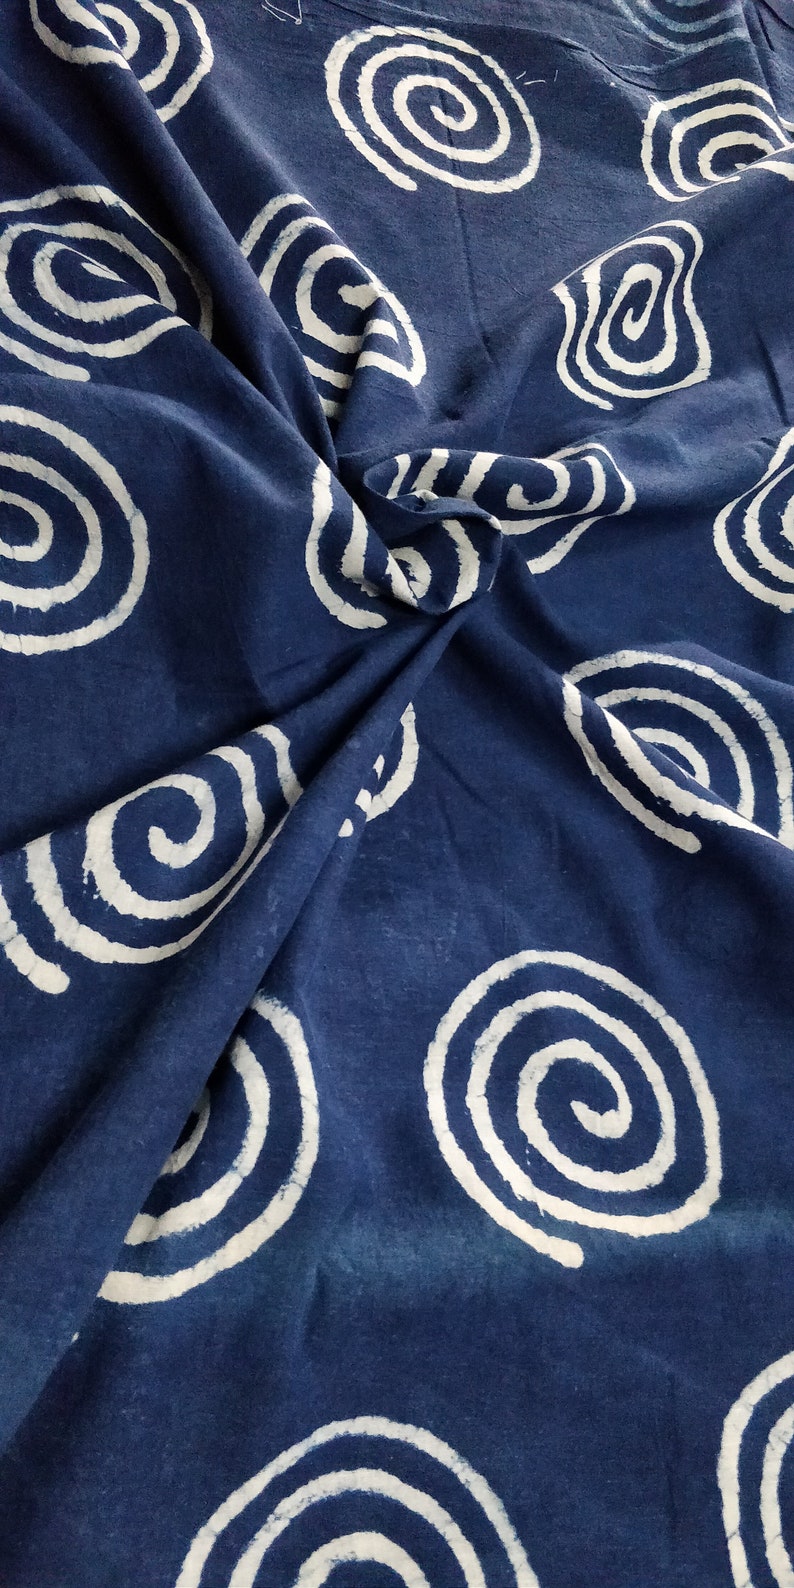 By The Yard Indigo Blue Bird Print Cotton Fabric dress,Table cloth curtains fabric Indian Hand Block Printed Natural Vegetable Dye Fabric